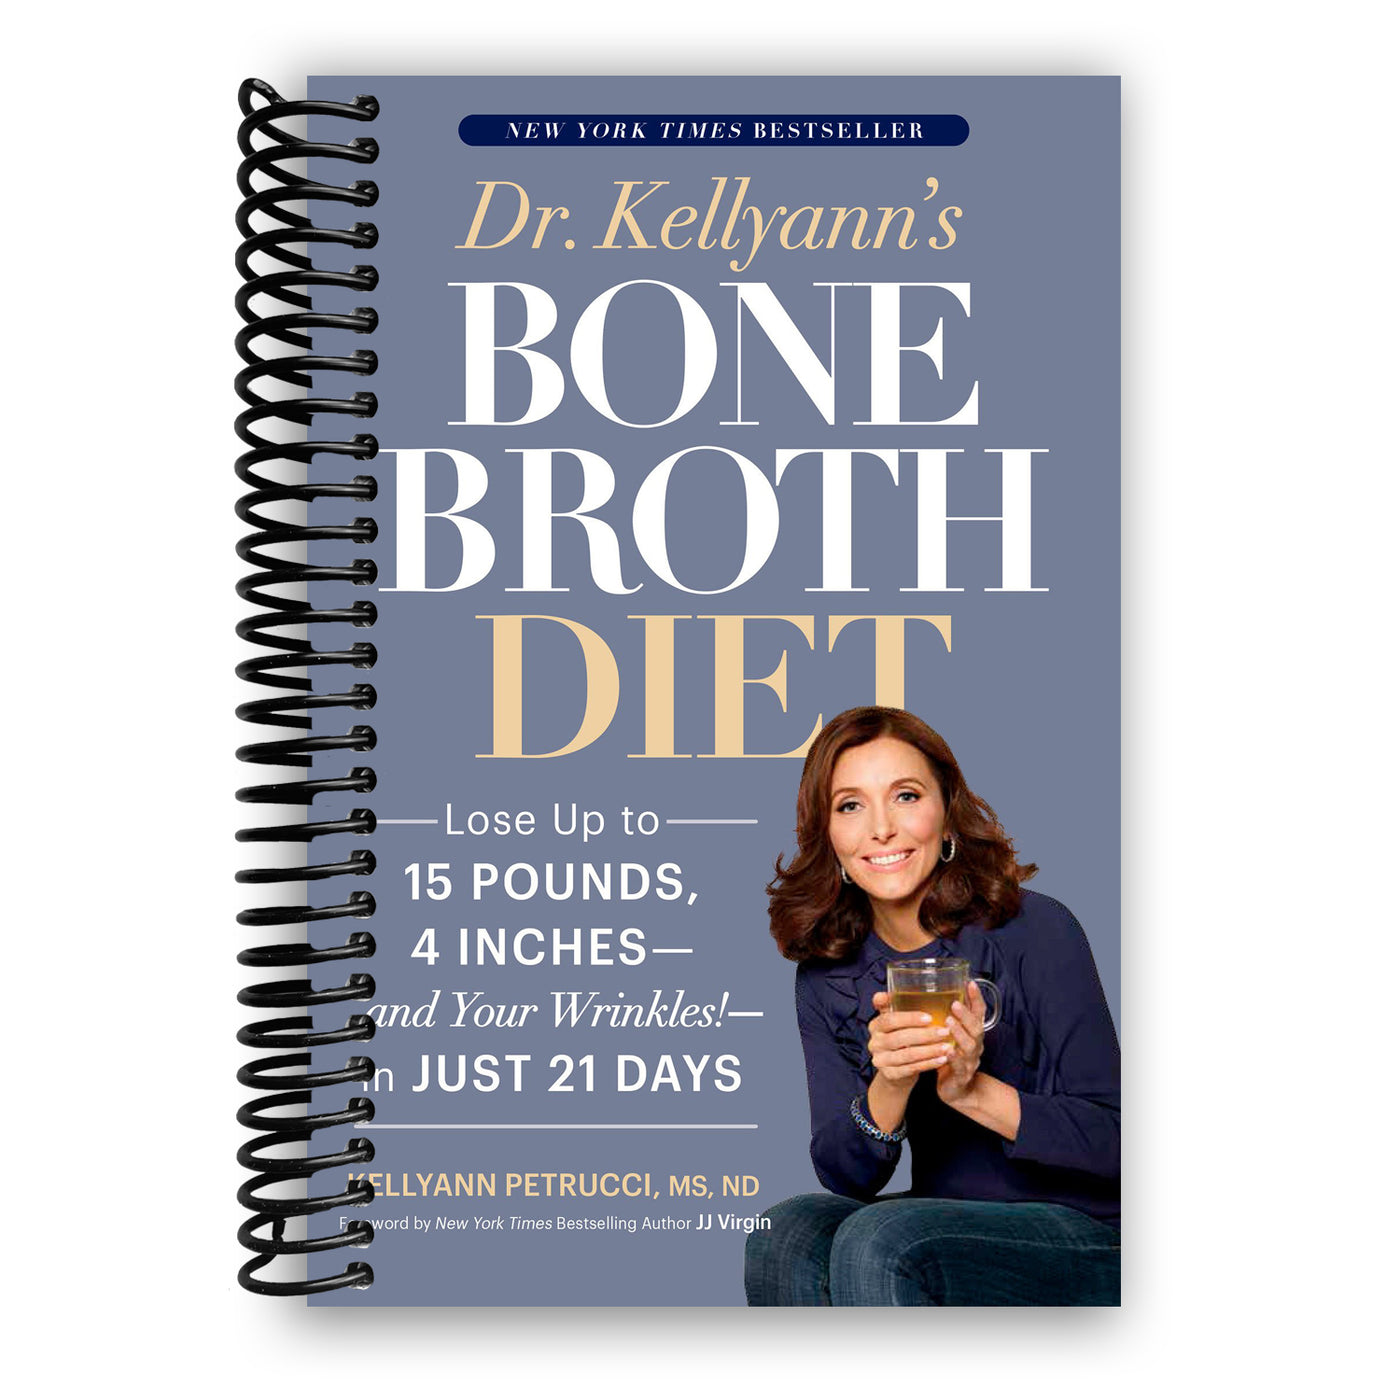 Dr. Kellyann's Bone Broth Diet: Lose Up to 15 Pounds, 4 Inches and Your Wrinkles! (Spiral Bound)